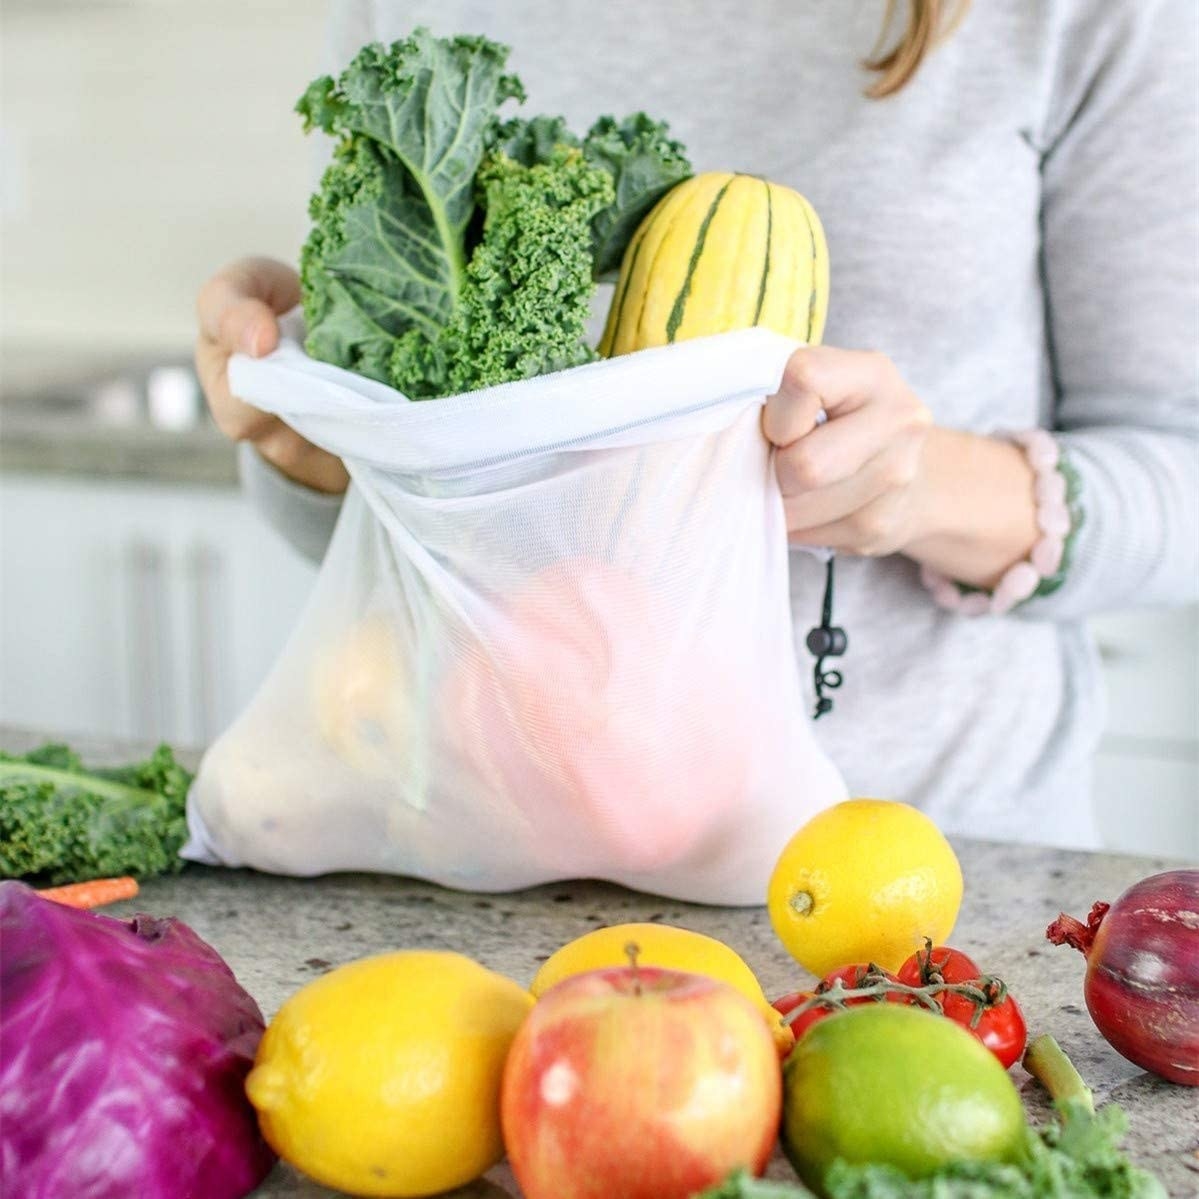 A person taking fruits and veggies out of a produce bag